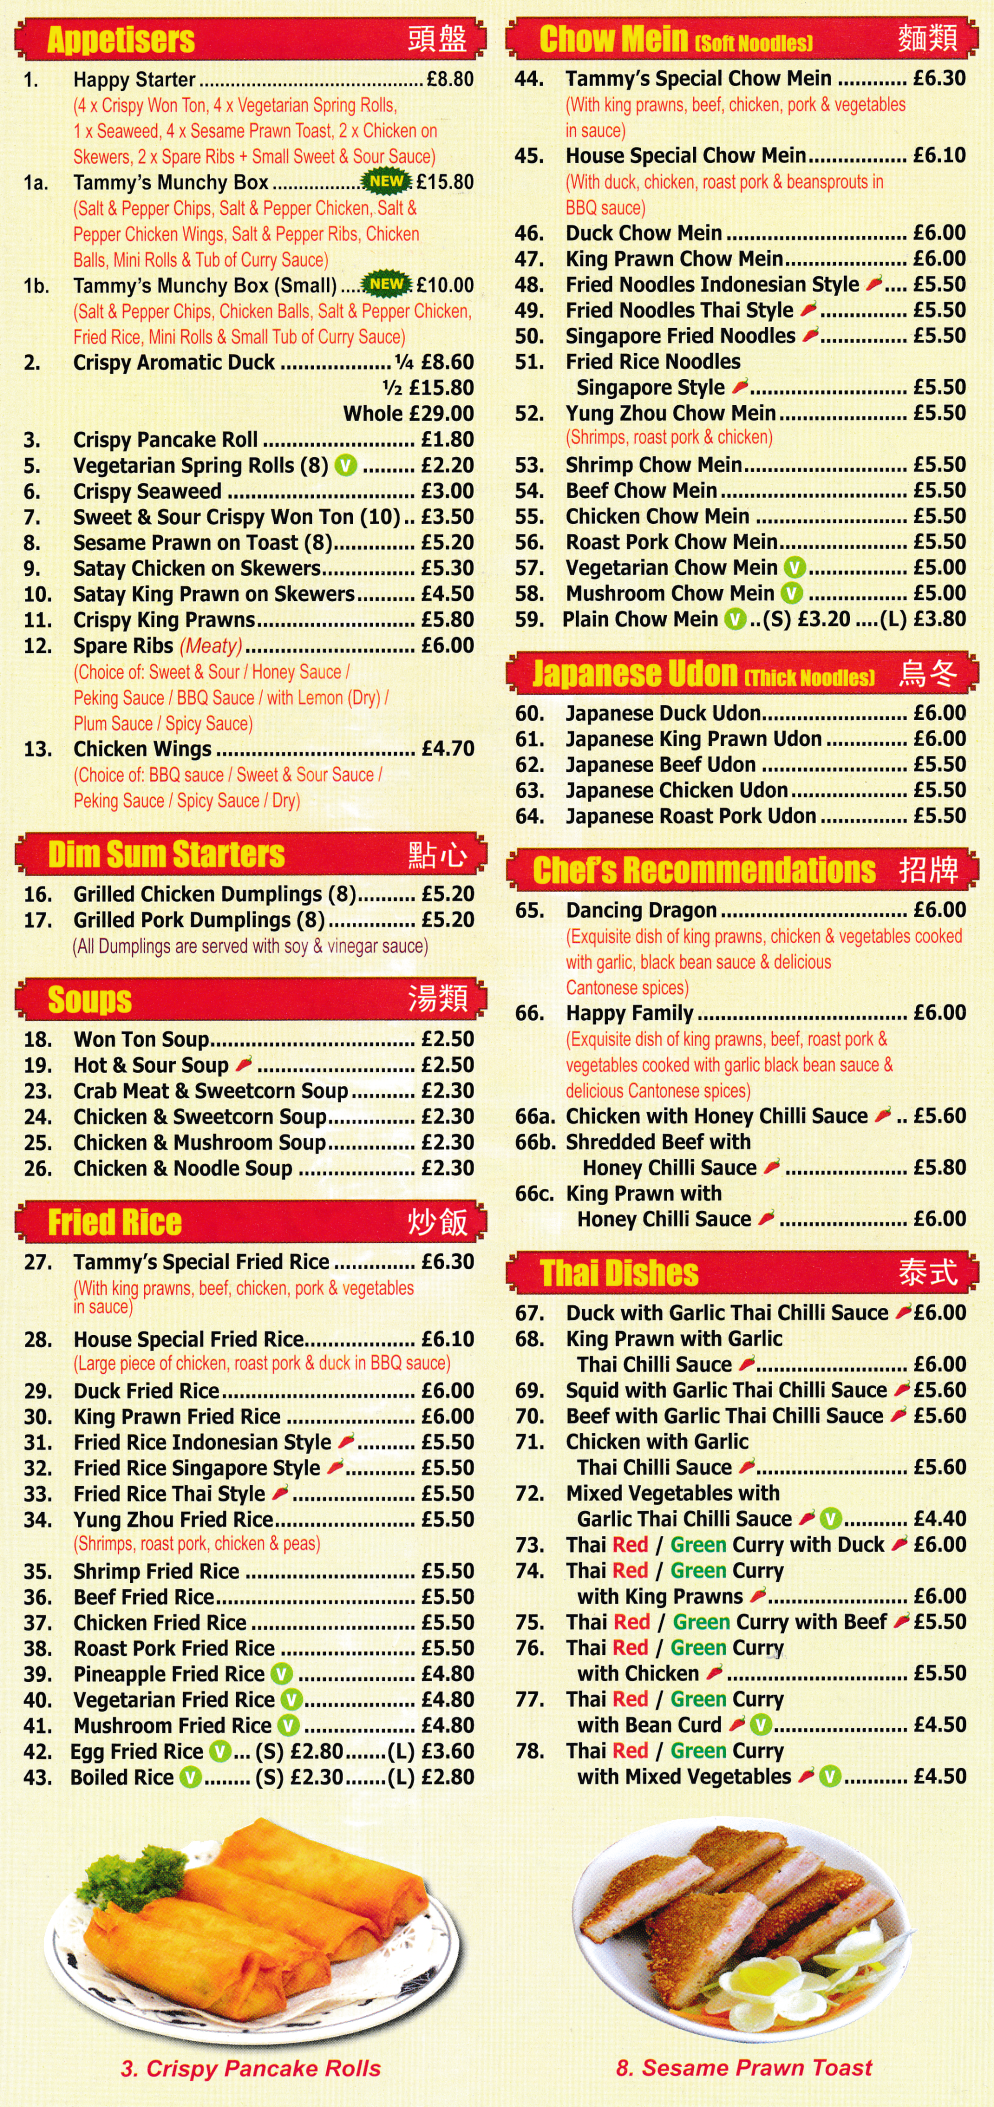 Menu for Tammy's Chinese food takeaway in Arnold (Chow Mein, Japanese Udon, Thai dishes, Dim Sum starters)